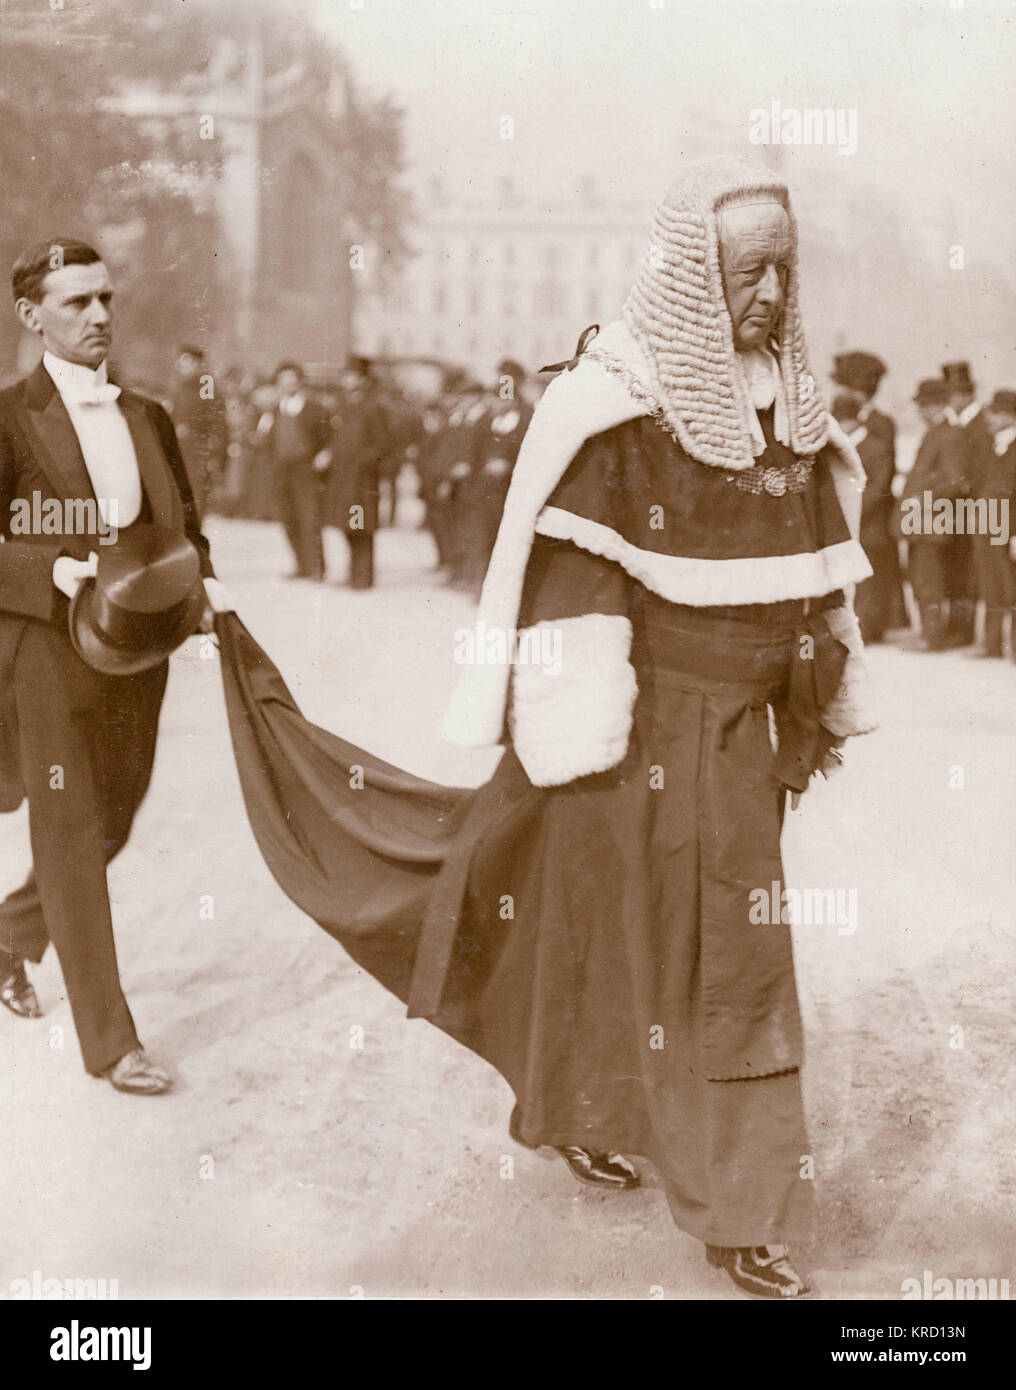 The Lord Chief Justice approaches Westminster Abbey as part of the judges' procession from the Royal Courts of Justice, for the annual religious service to mark the beginning of the legal year.  The custom dates back to the Middle Ages.       Date: 12 October 1911 Stock Photo